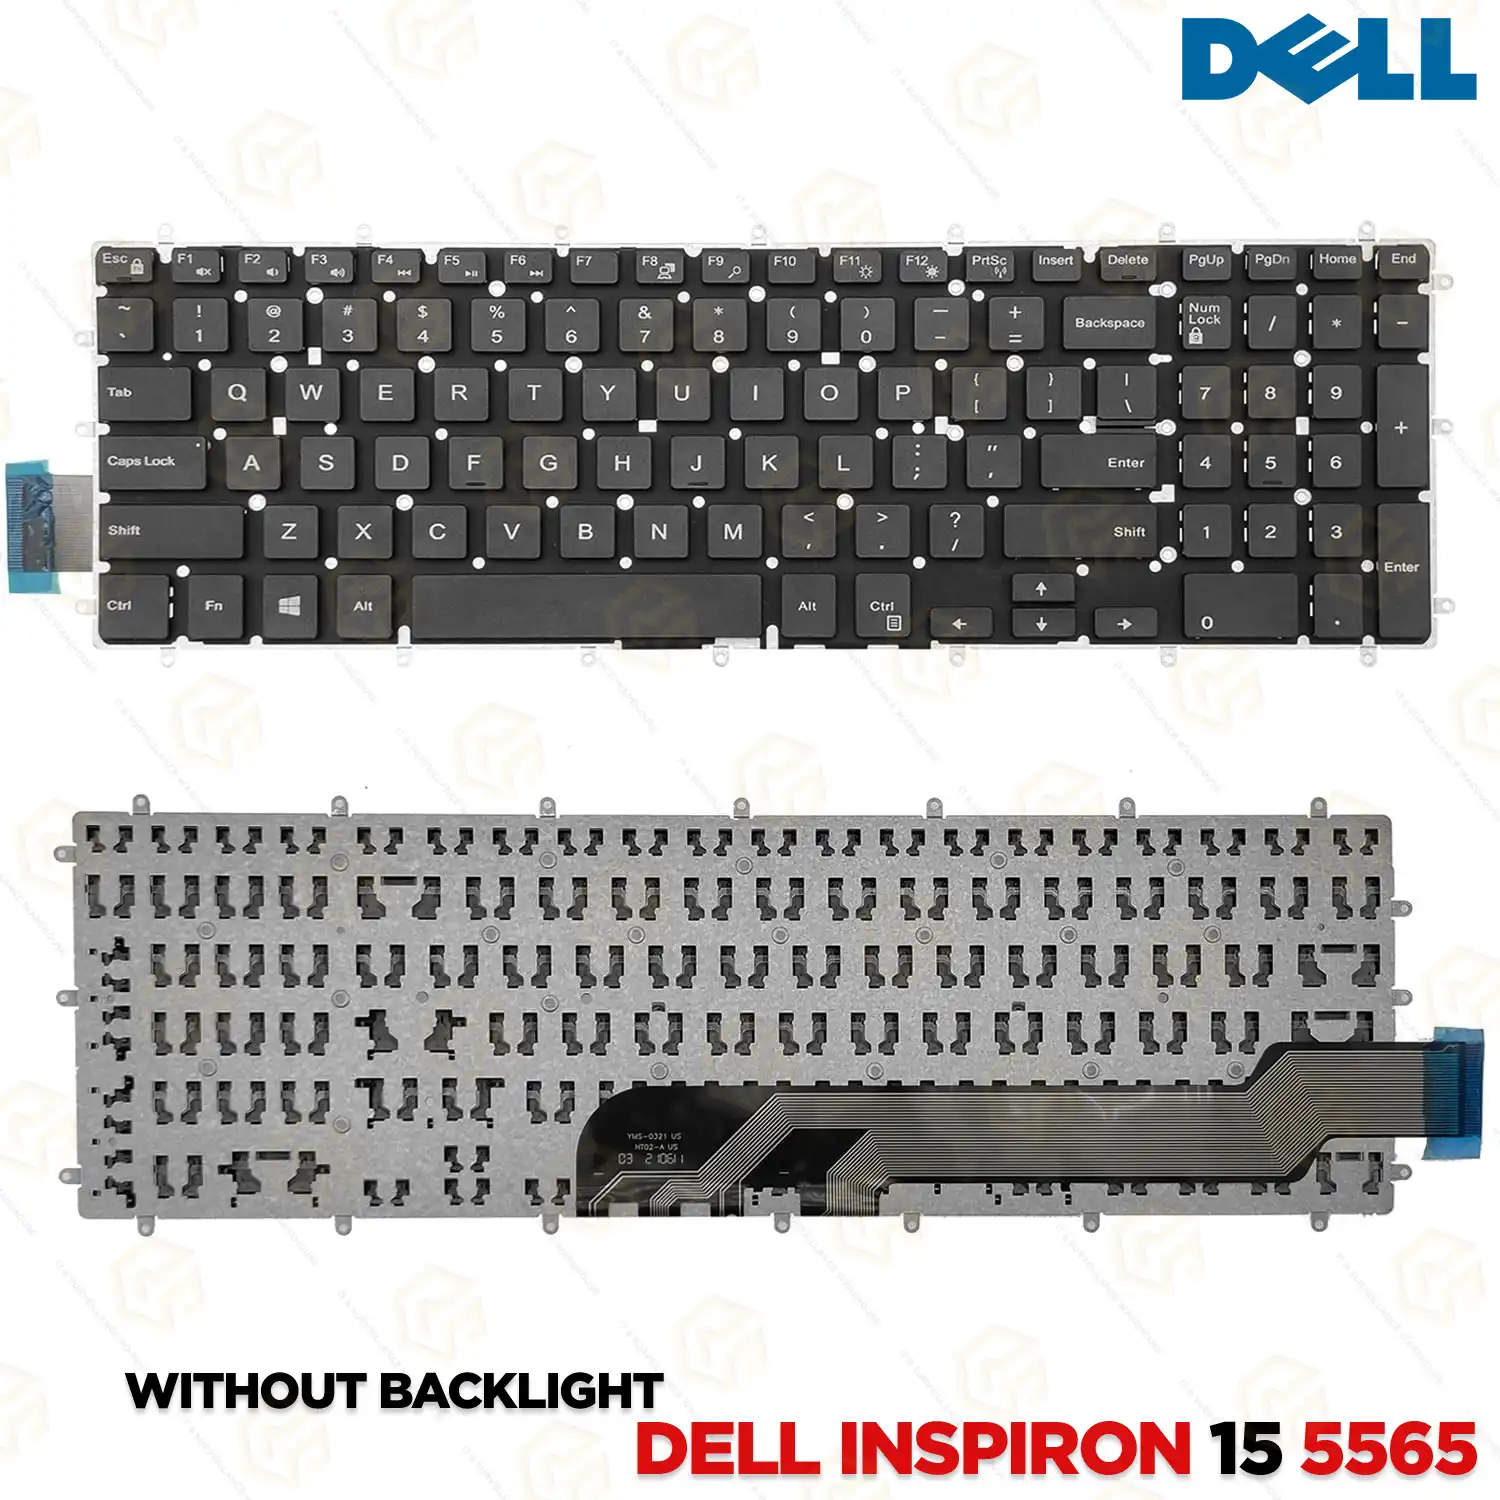 LAPTOP KEYBOARD FOR DELL INSPIRON 15 5565 (WITHOUT BACKLIGHT)